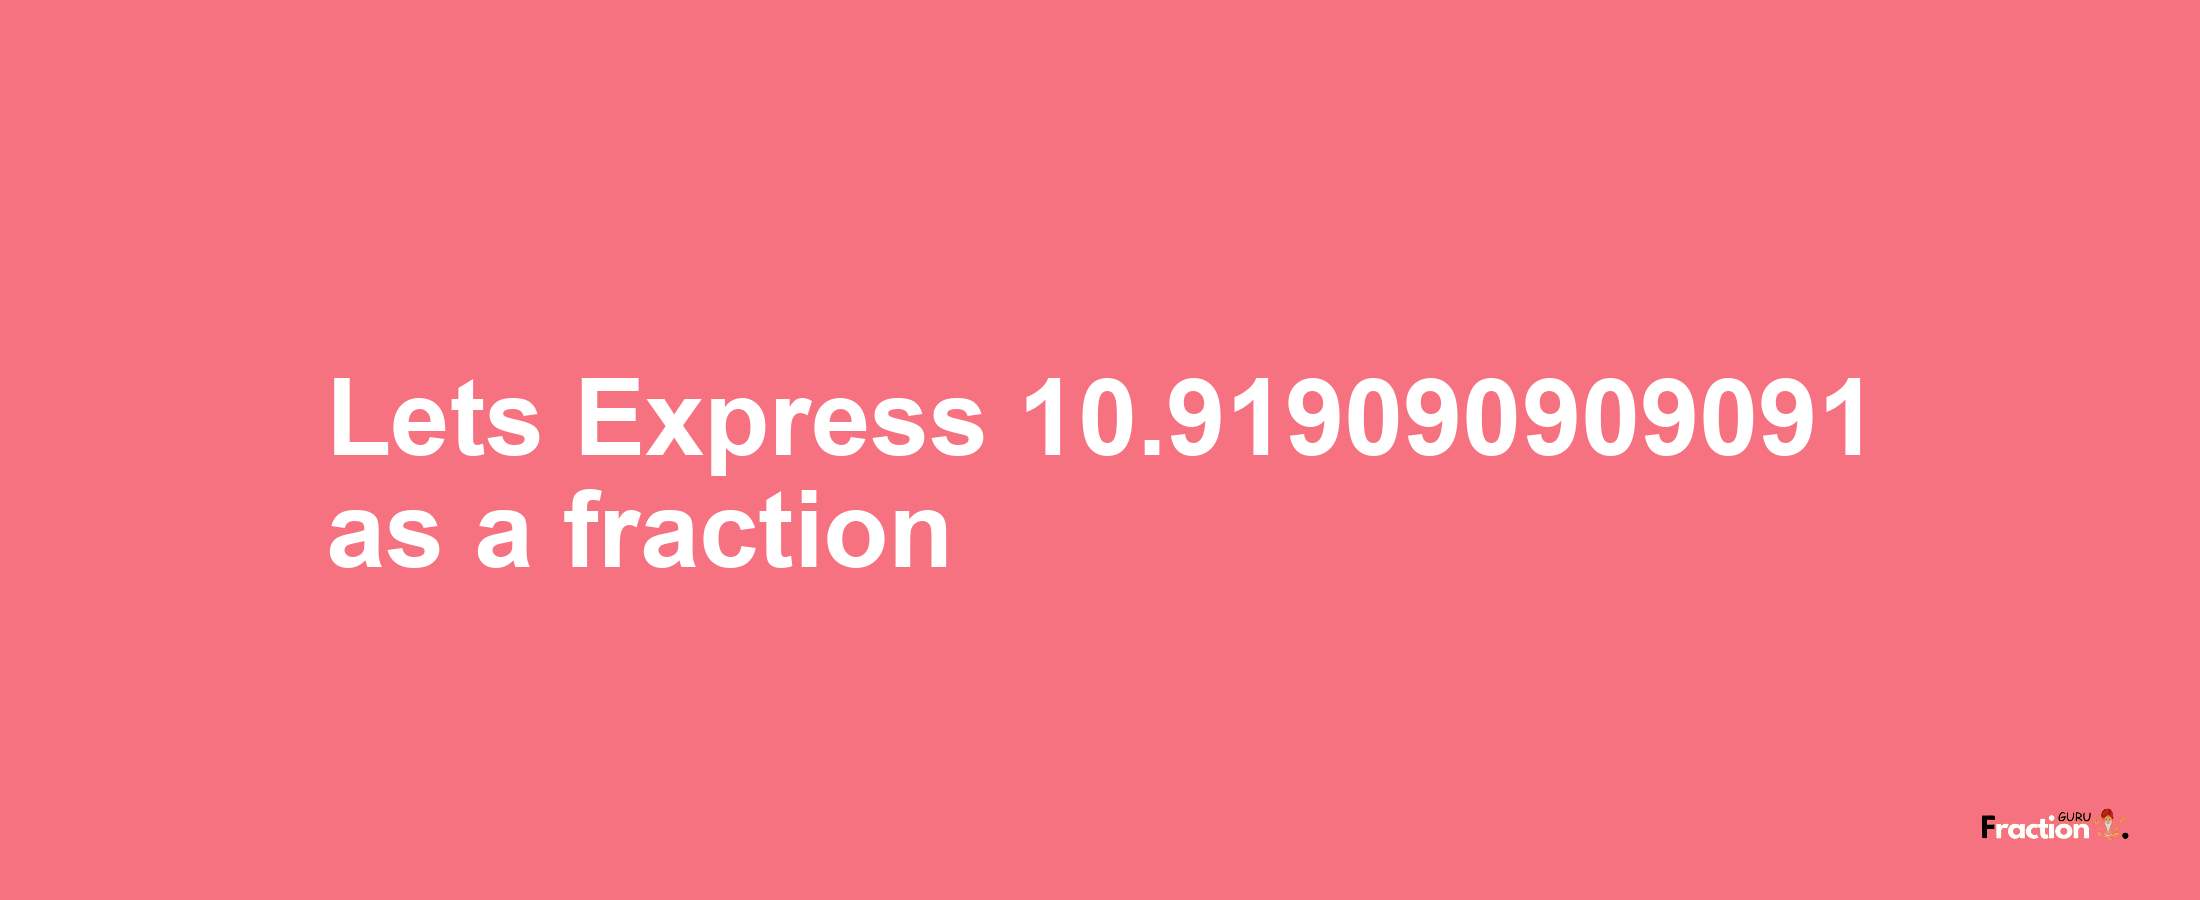 Lets Express 10.919090909091 as afraction